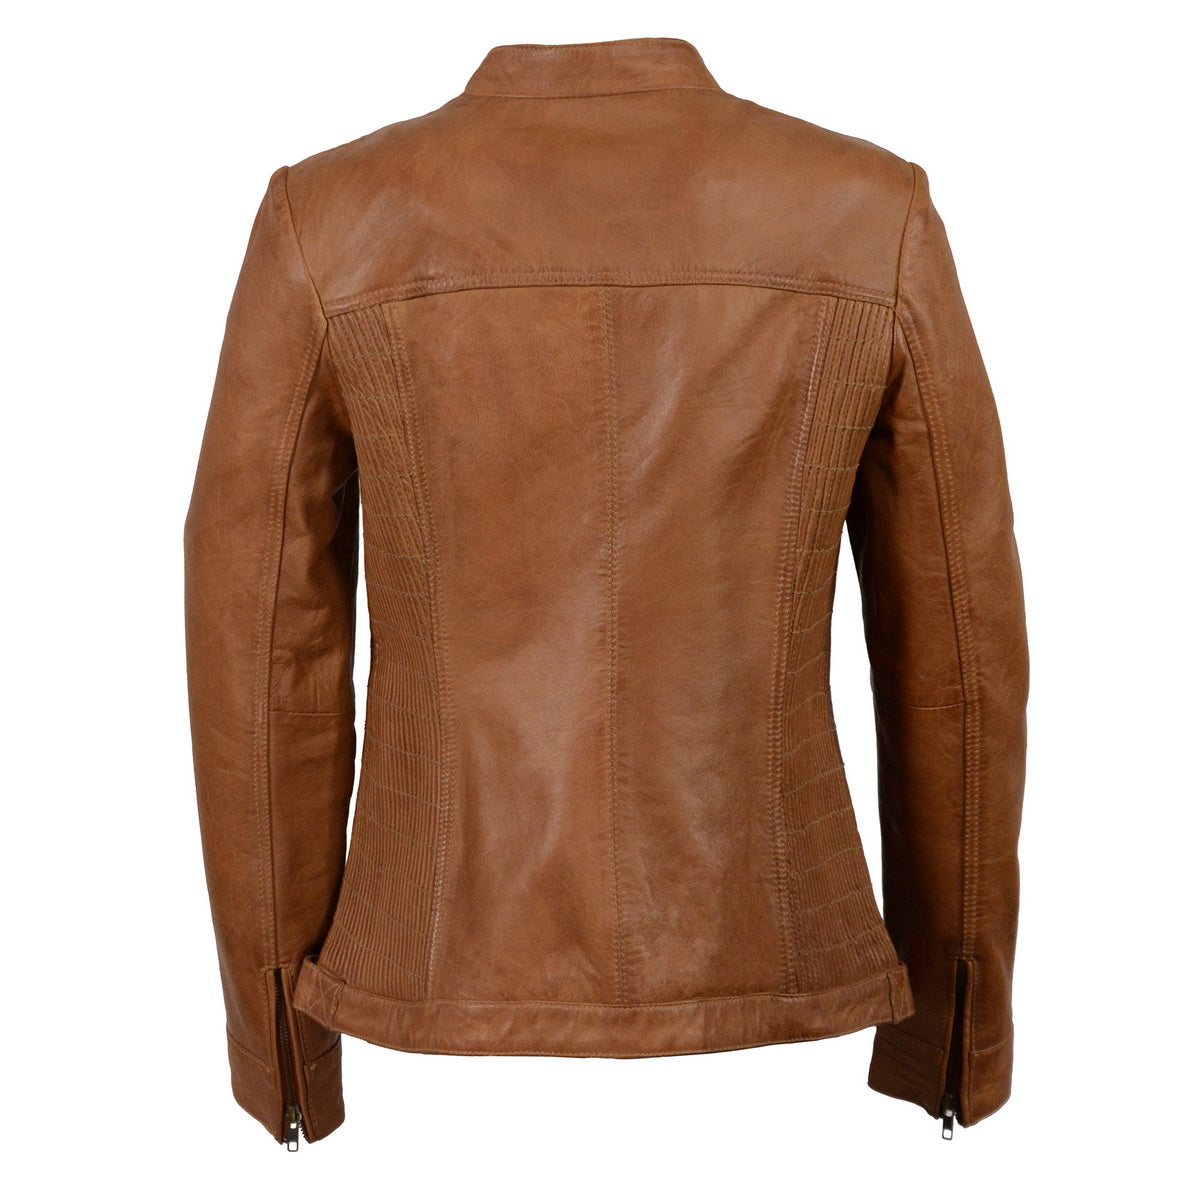 Milwaukee Leather SFL2855 Women's Saddle Zip Front Leather Jacket with Side Stretch Fitting